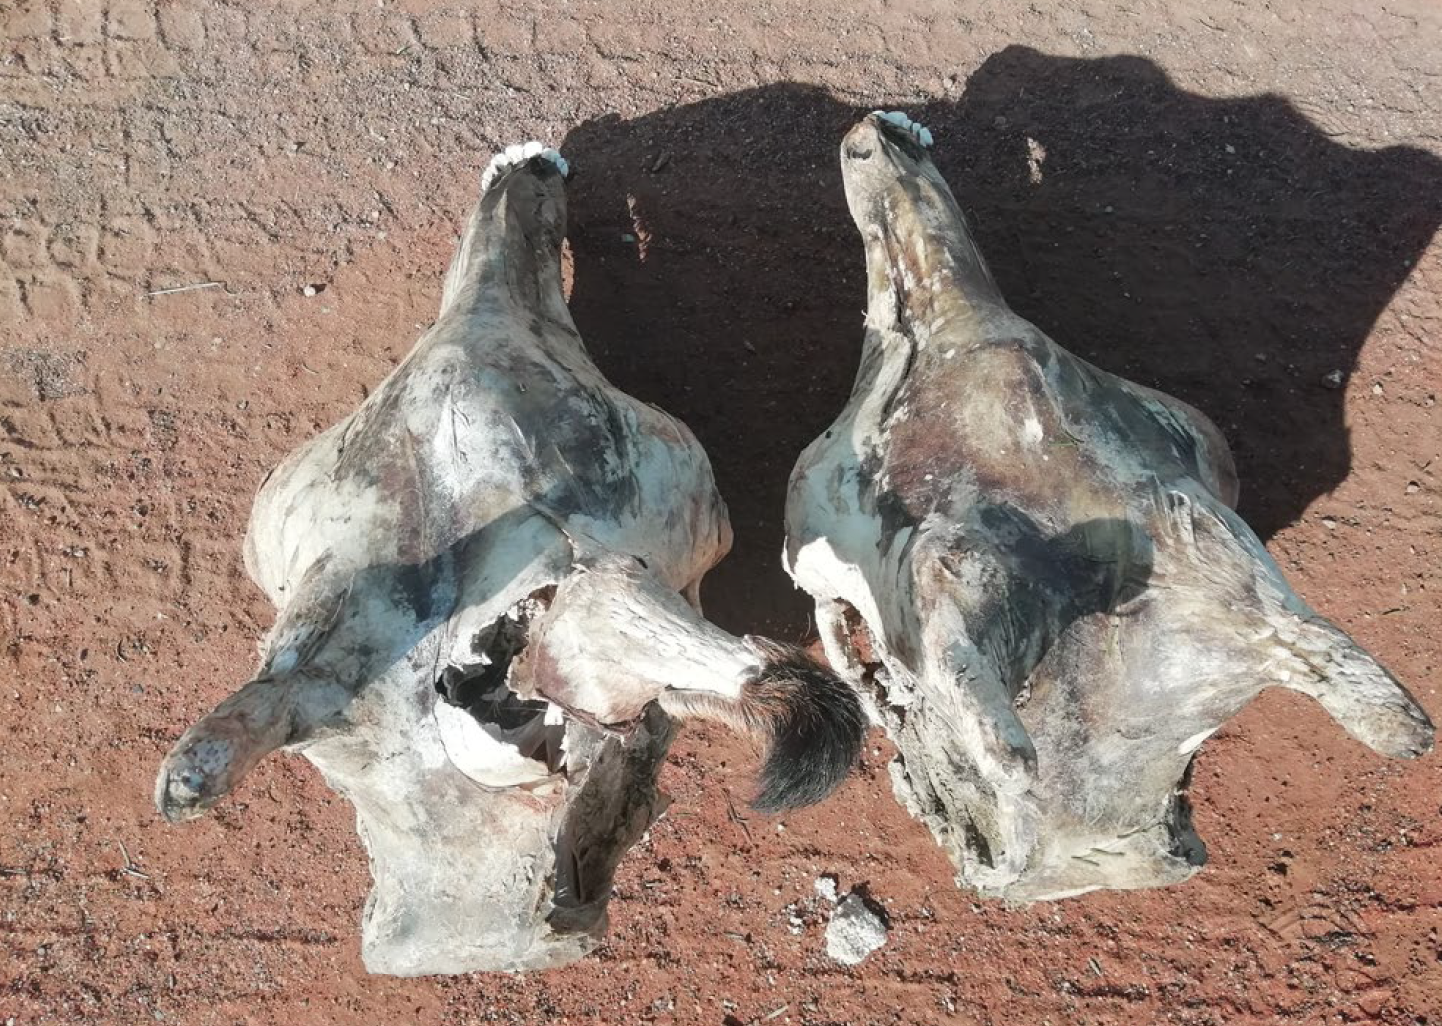 Skulls of two giraffes killed by lightning. The older of the two (left) exhibits a fracture at the base of the right ossicone. The skulls were prepared by flaying and drying in the Sun.  (Image: Ciska P. J. Scheijen/Rockwood Conservation Fund)